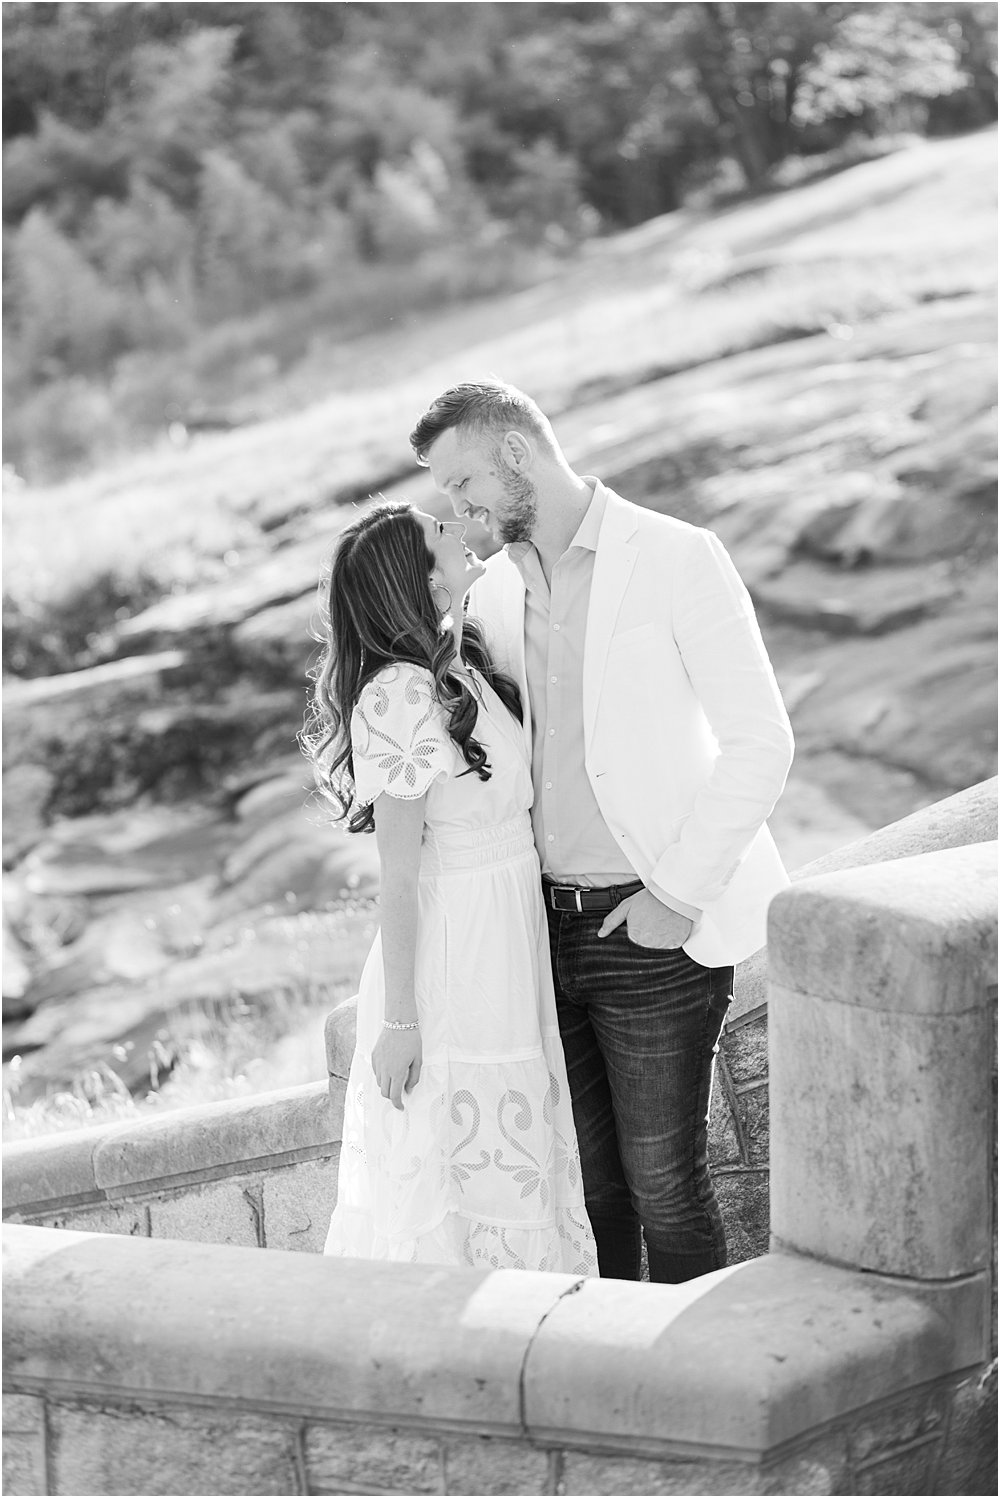 The couple, smiling and nose to nose, prepare to kiss beneath at the top of a stone staircase at Maymont during their effortlessly chic engagement session.